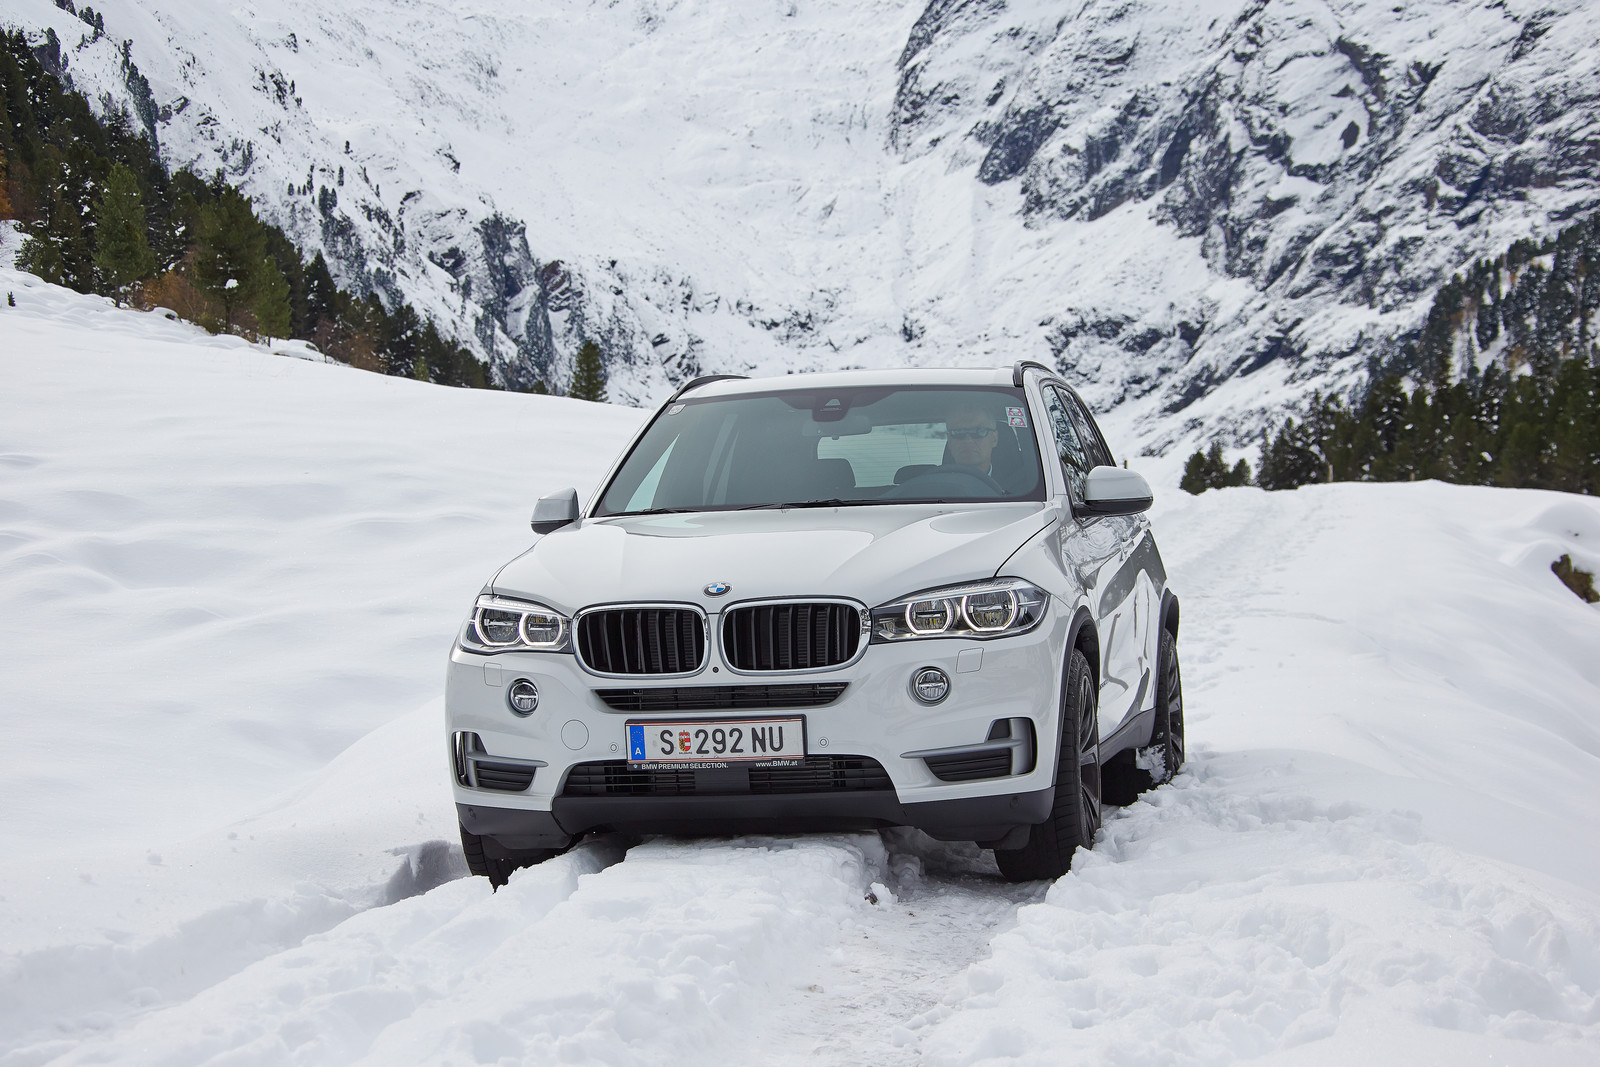 BMW X5 2013 snow. Front view